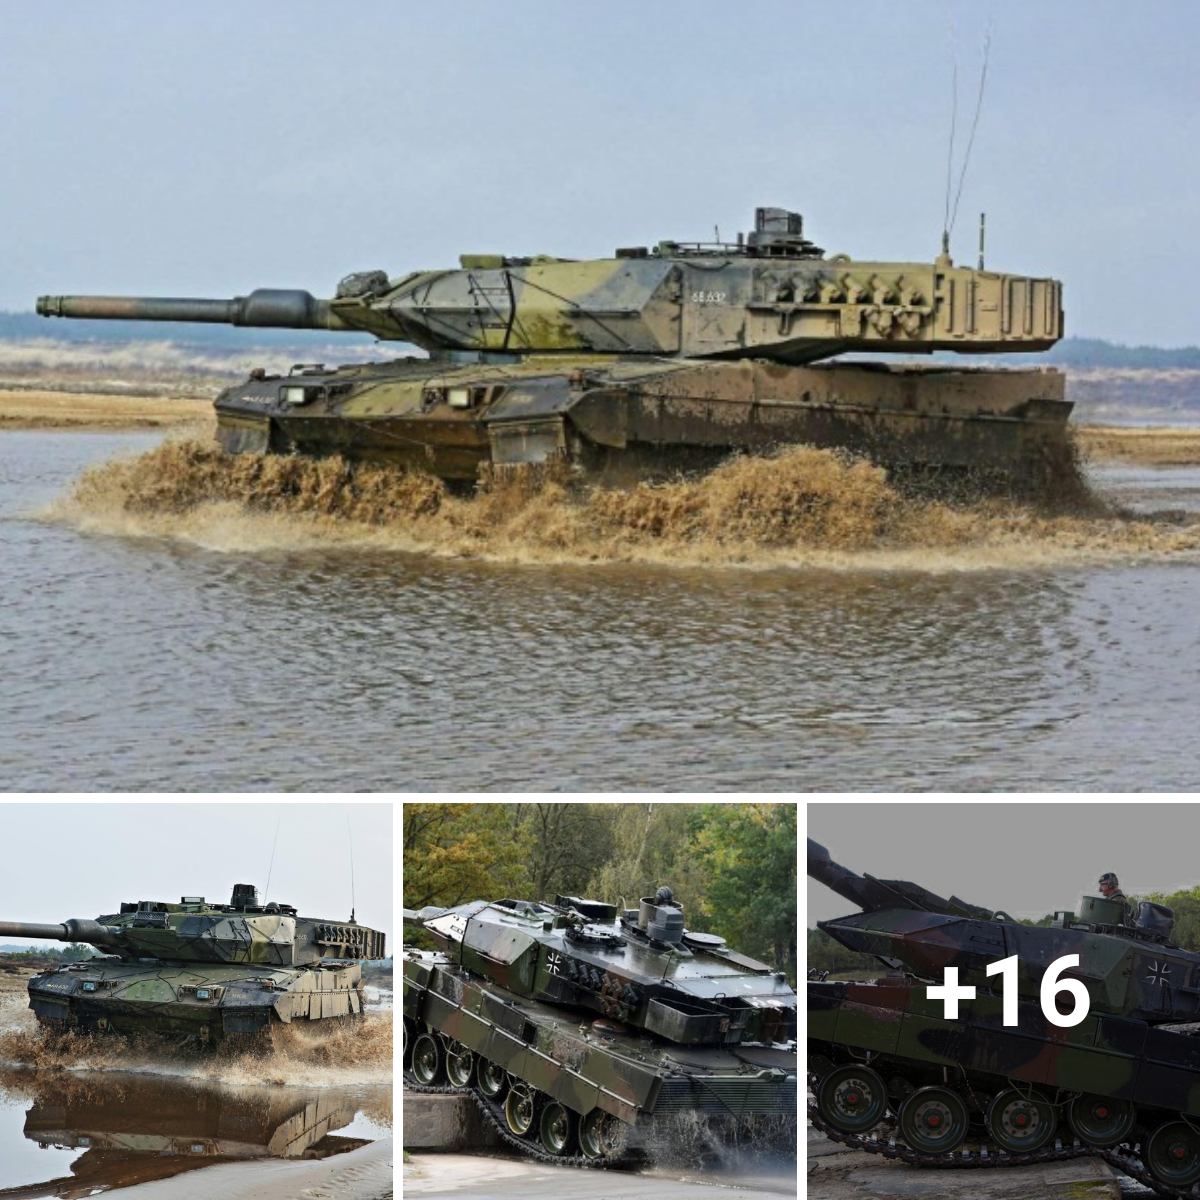 The most advanced main combat tank in the world, the Leopard 2A5, serves as the “Steel Wall” of the German Army.